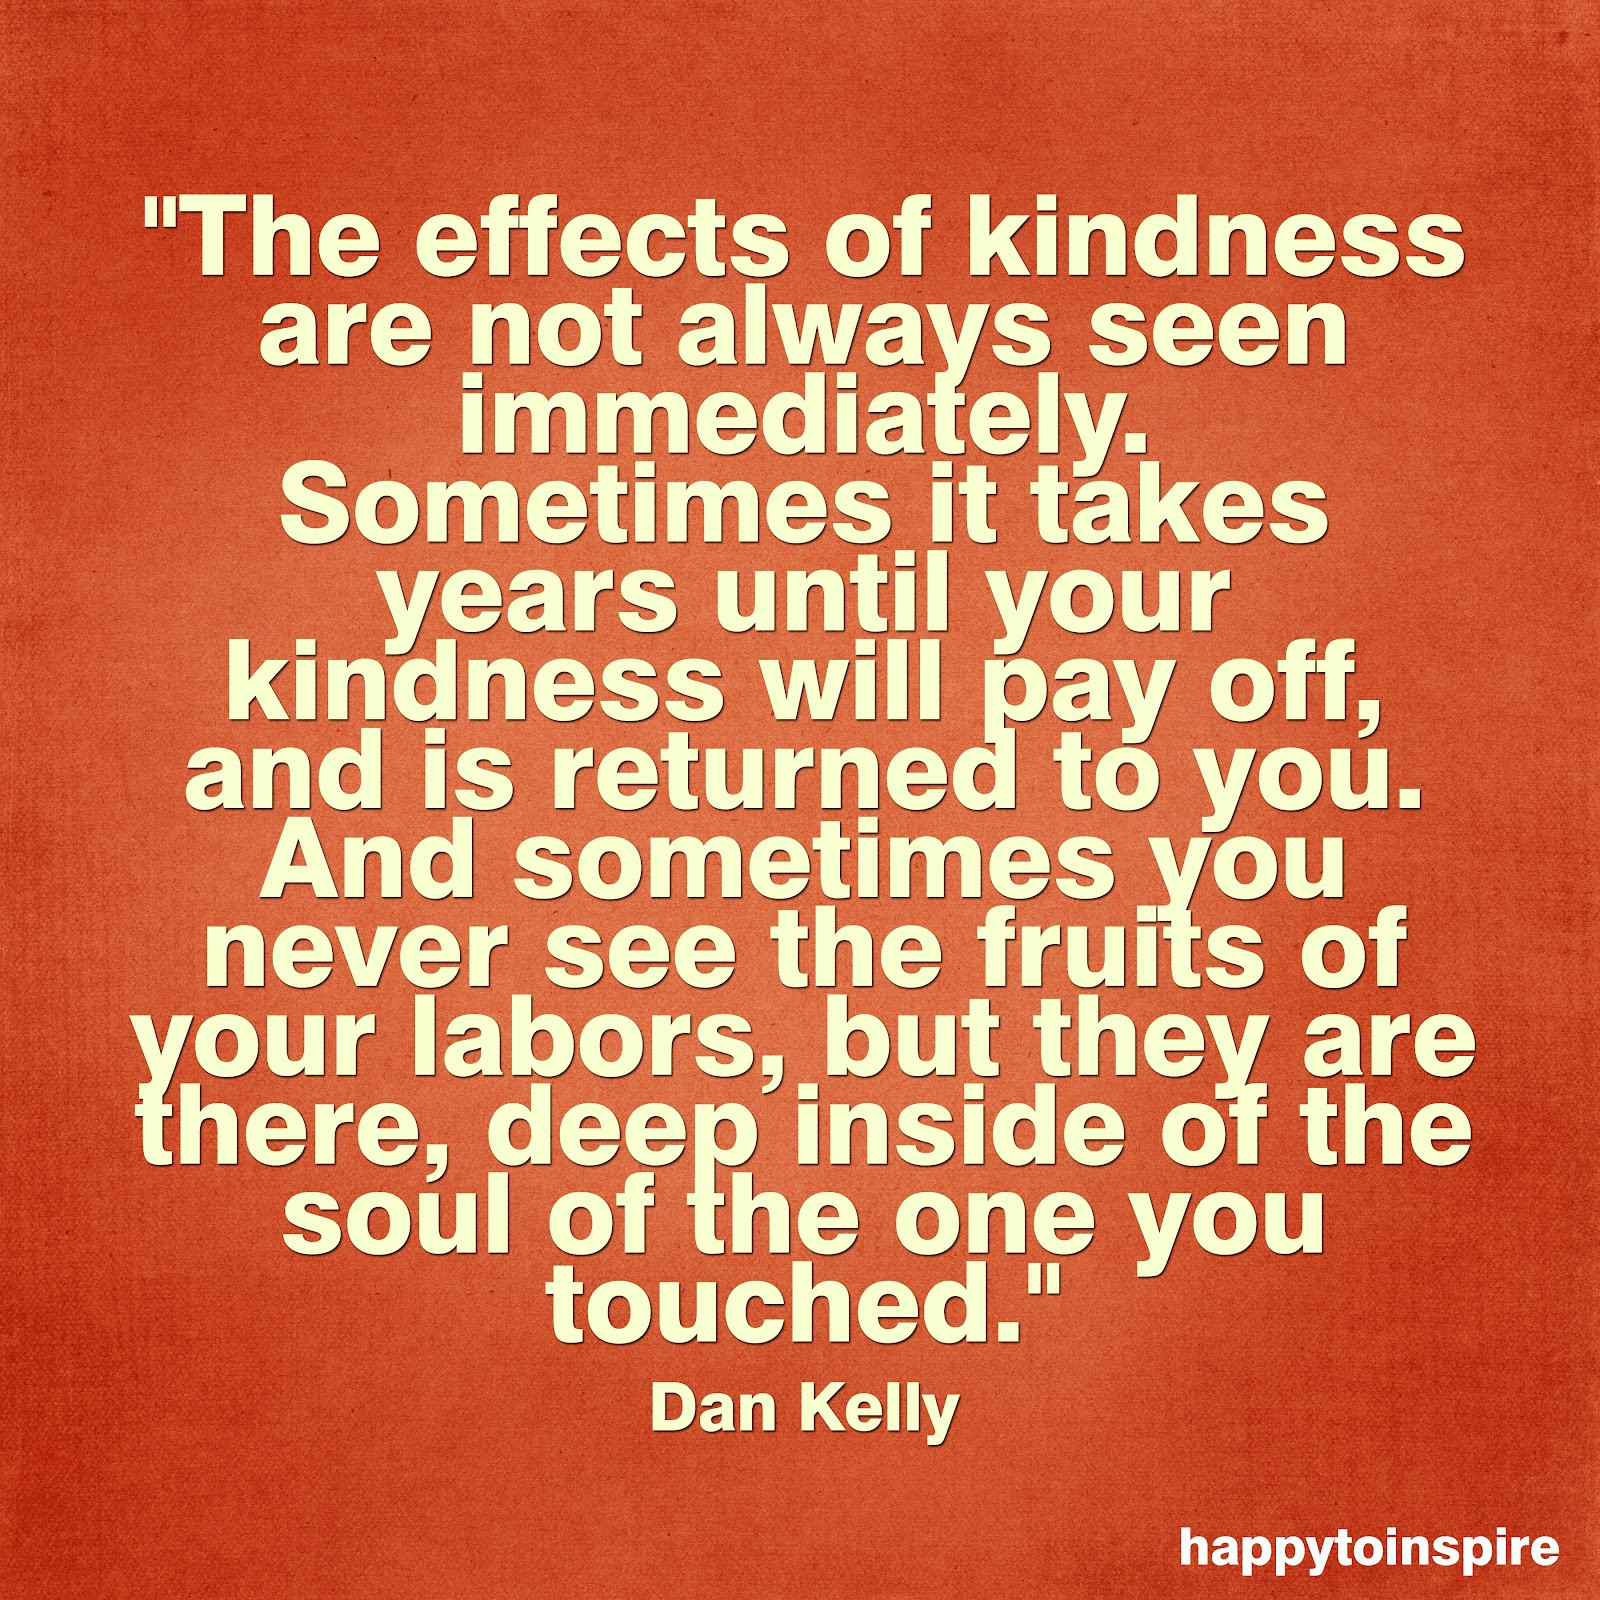 Quote Kindness
 Happy To Inspire Quote of the Day The effects of